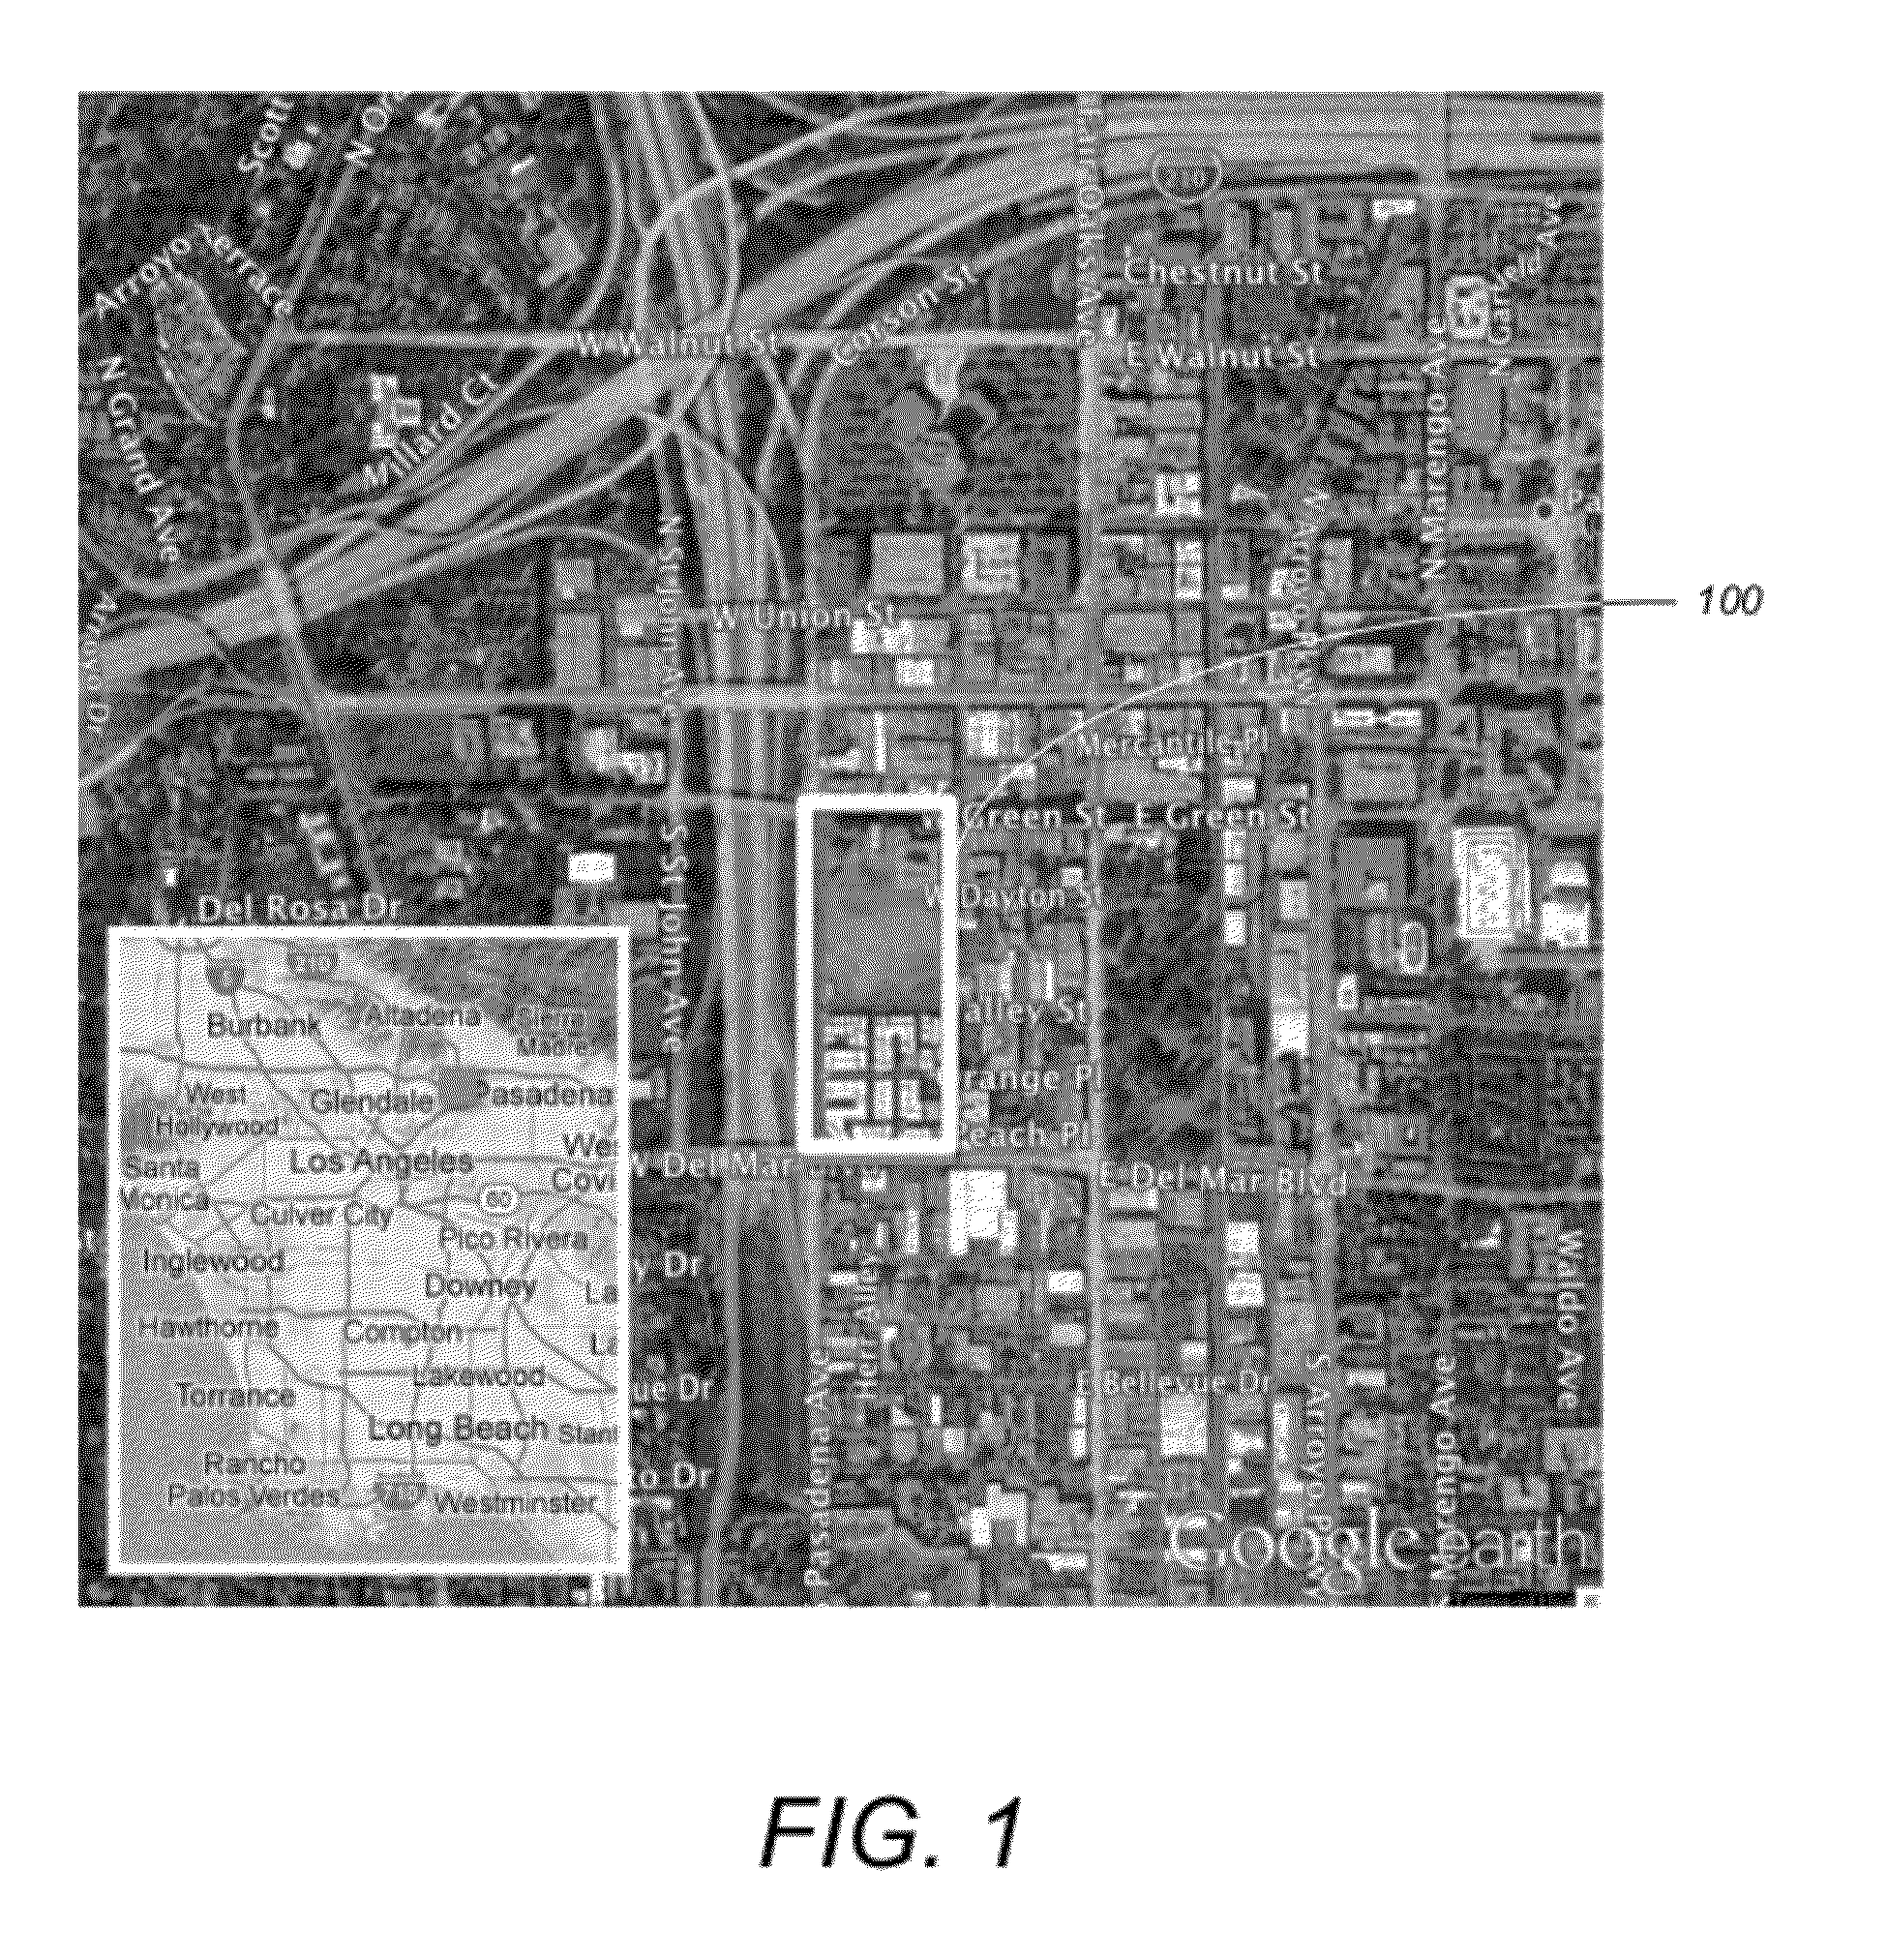 Damage proxy map from interferometric synthetic aperture radar coherence